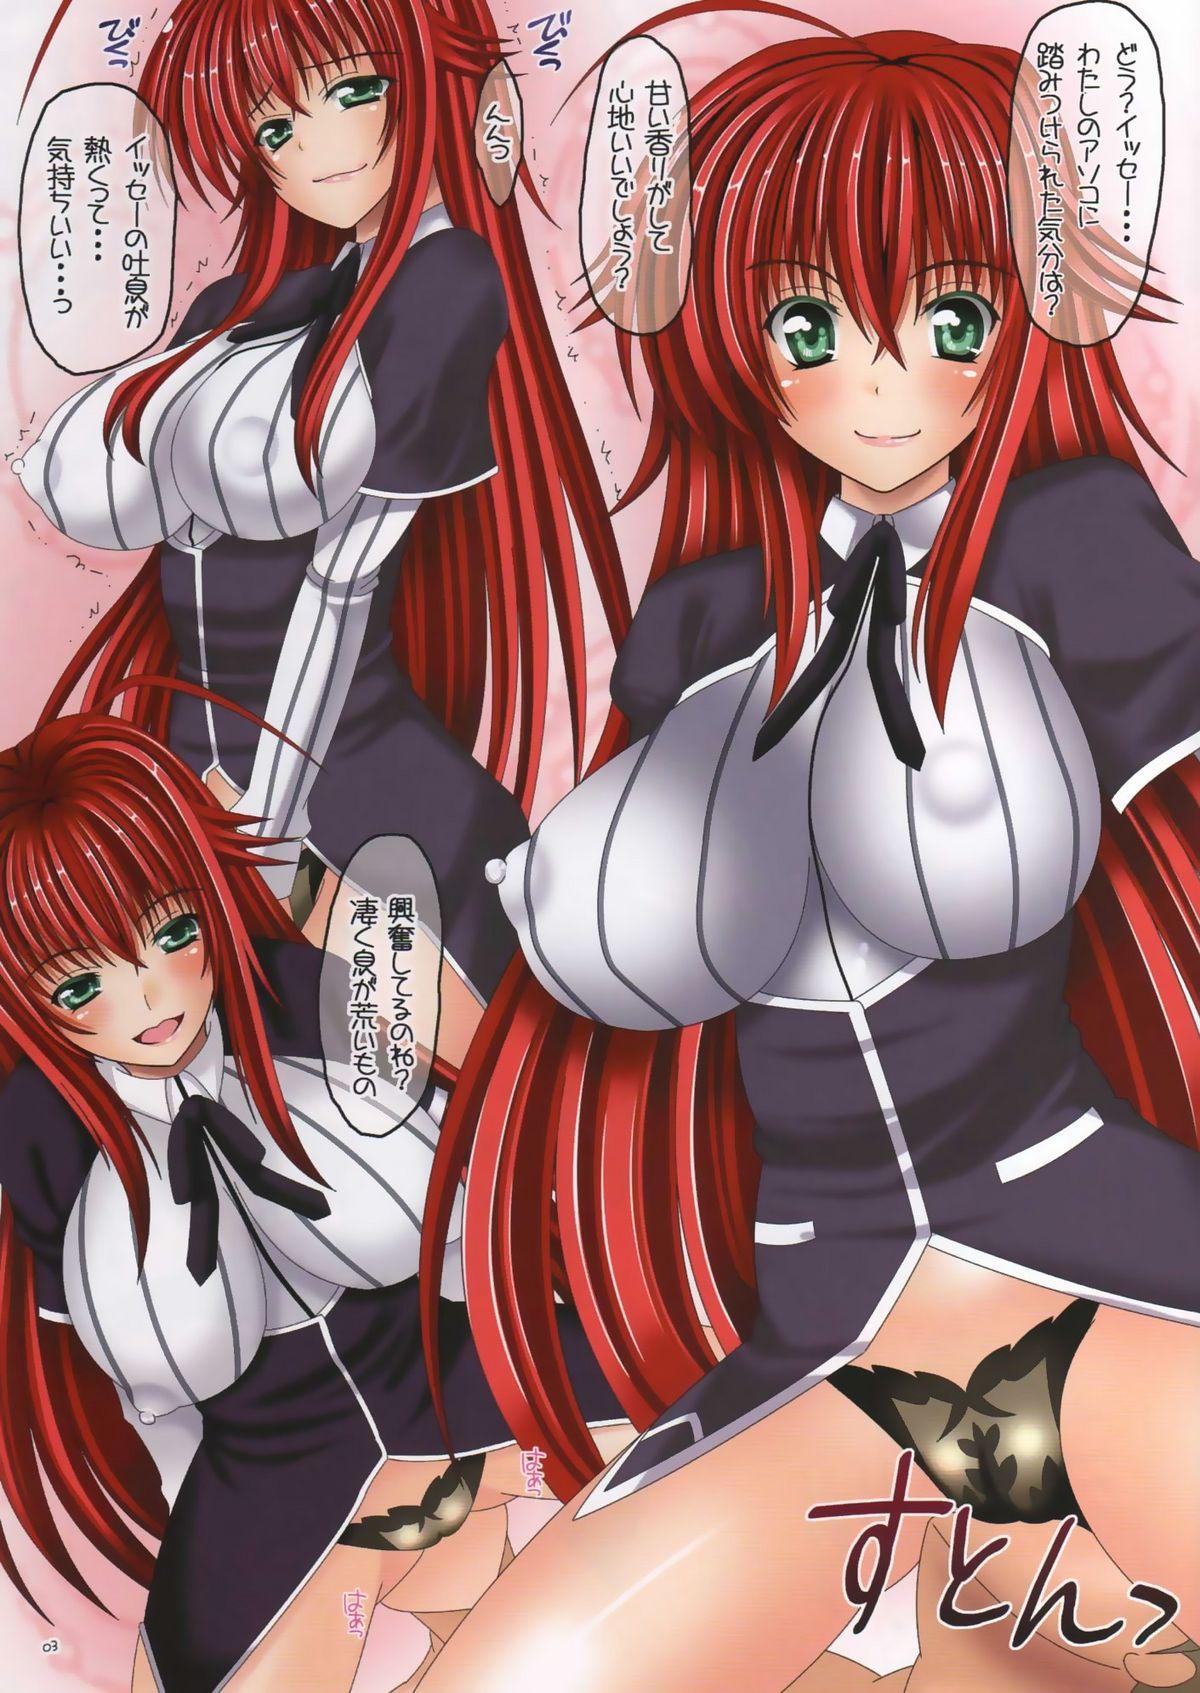 Girl On Girl Colorful DxD - Highschool dxd Pounded - Page 2